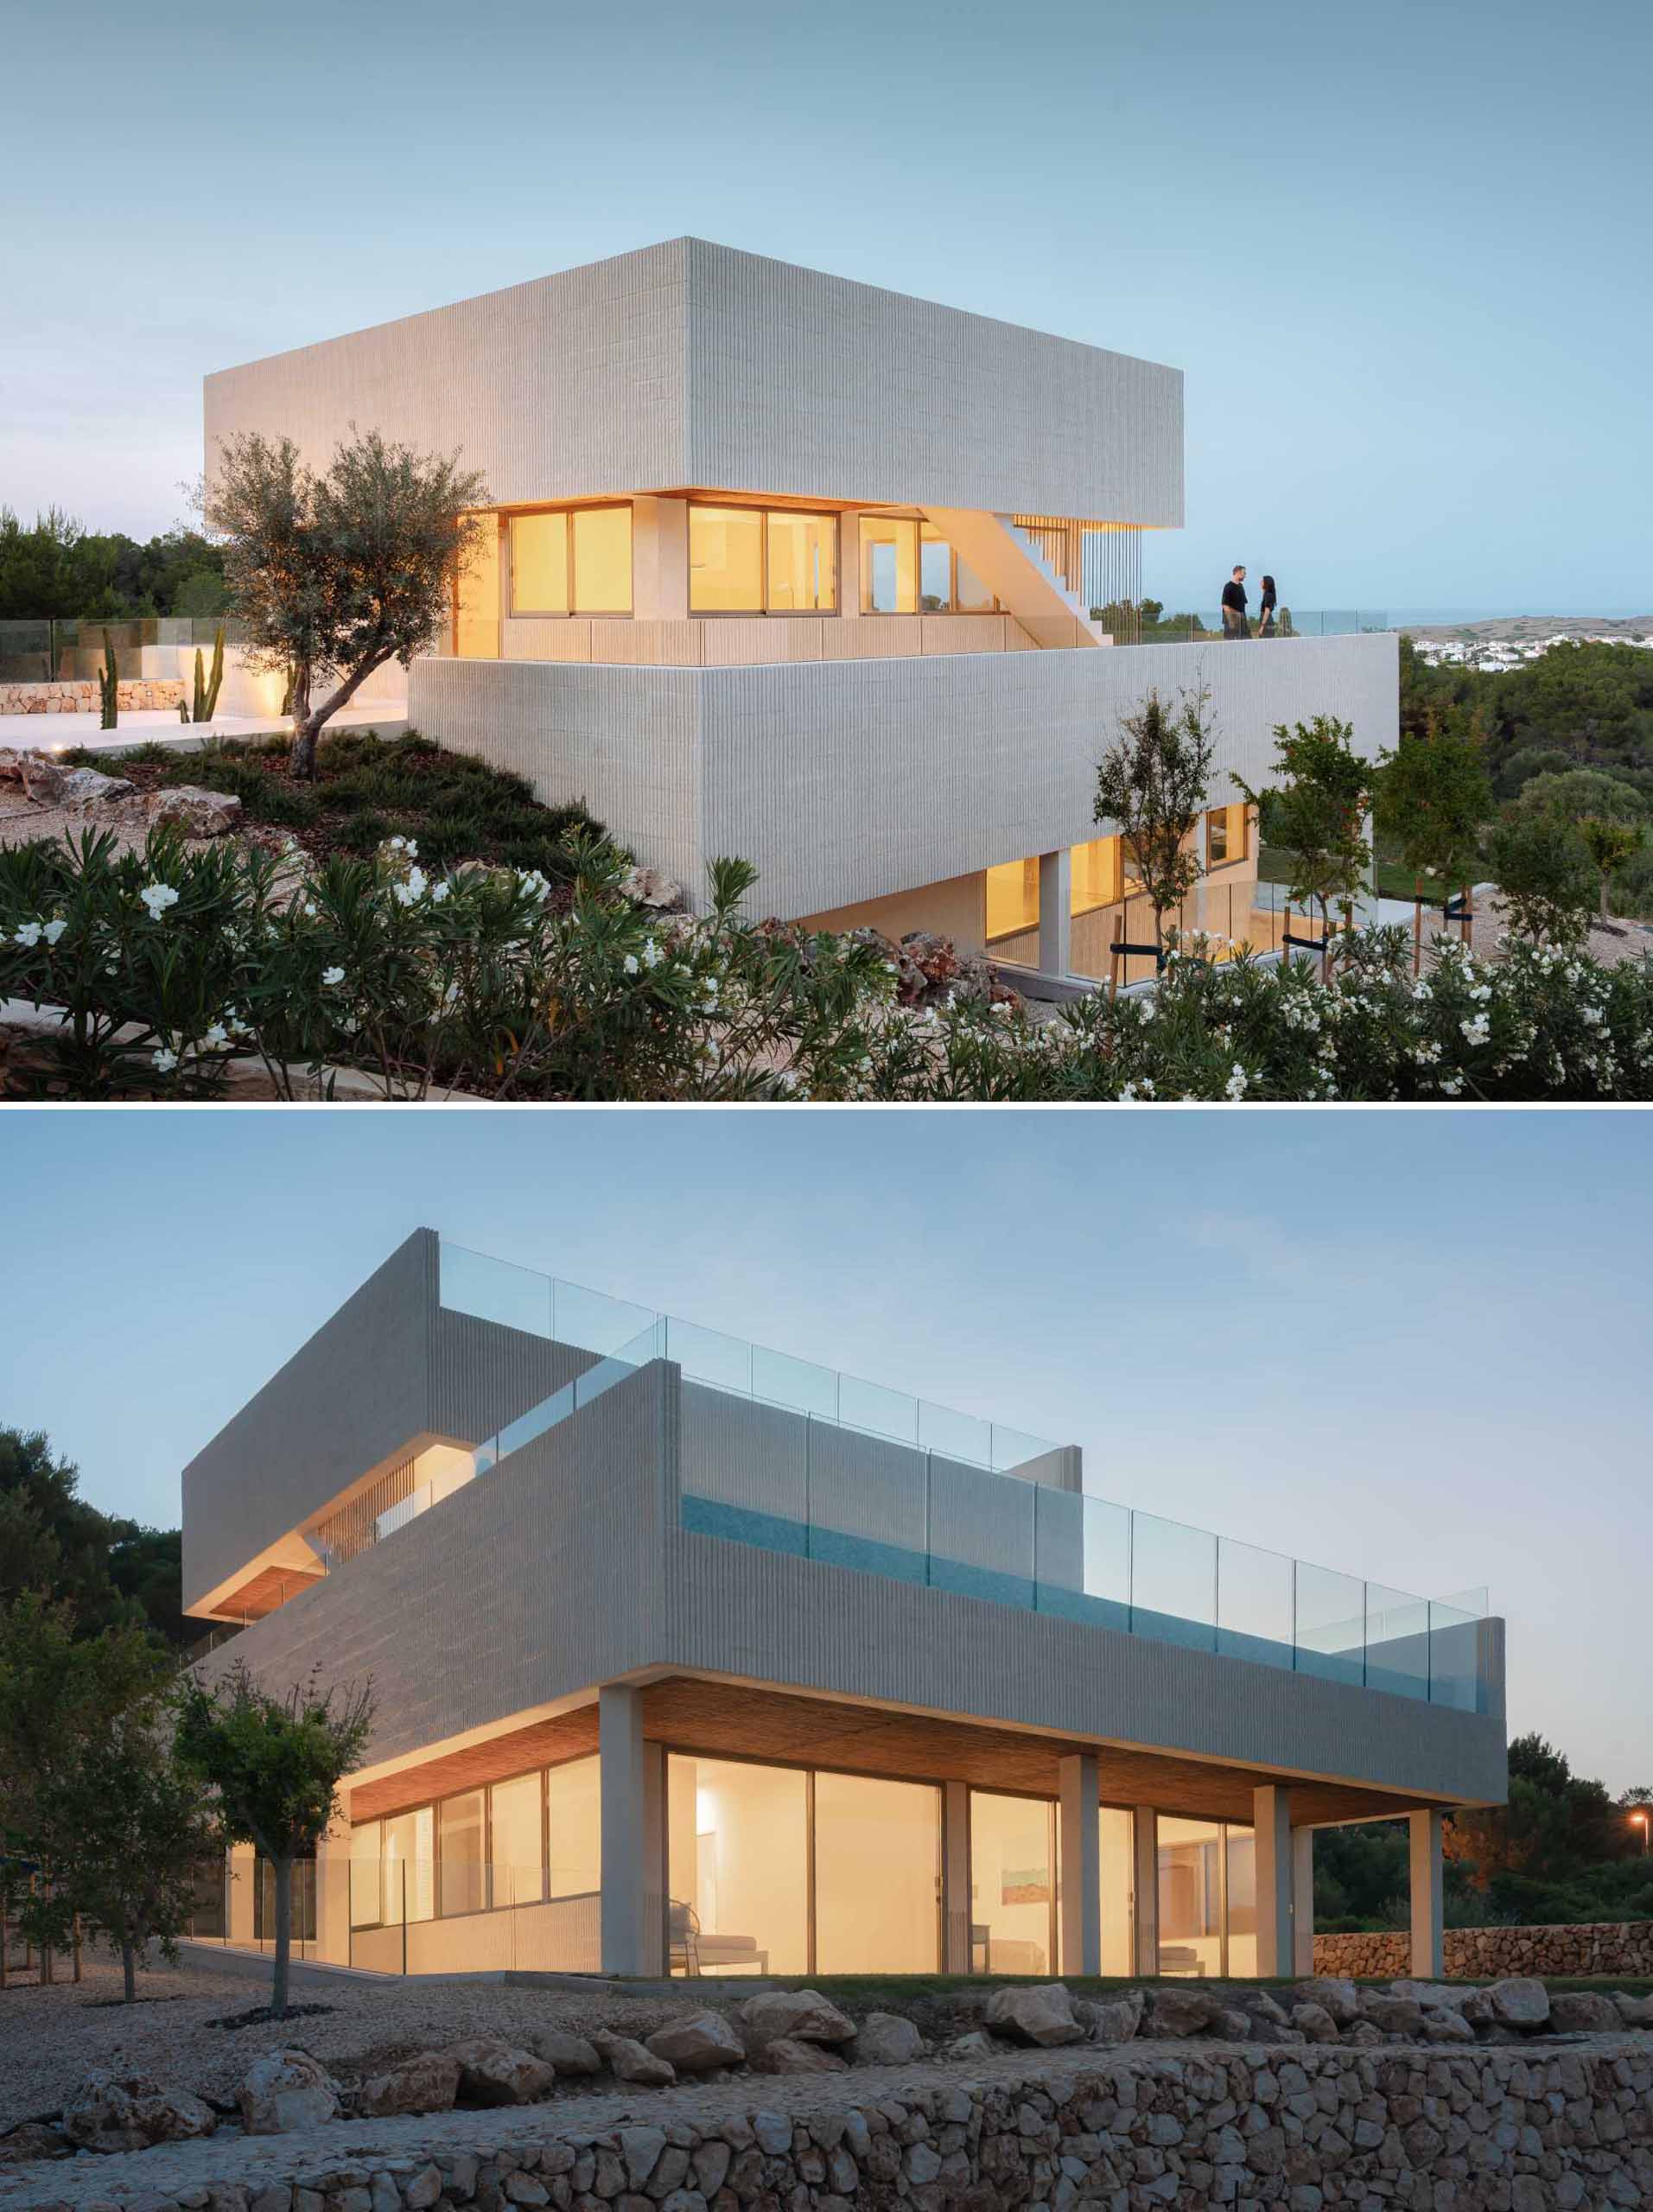 A modern multi-storey home in Menorca, Spain, that features a textured facade of fluted concrete walls.